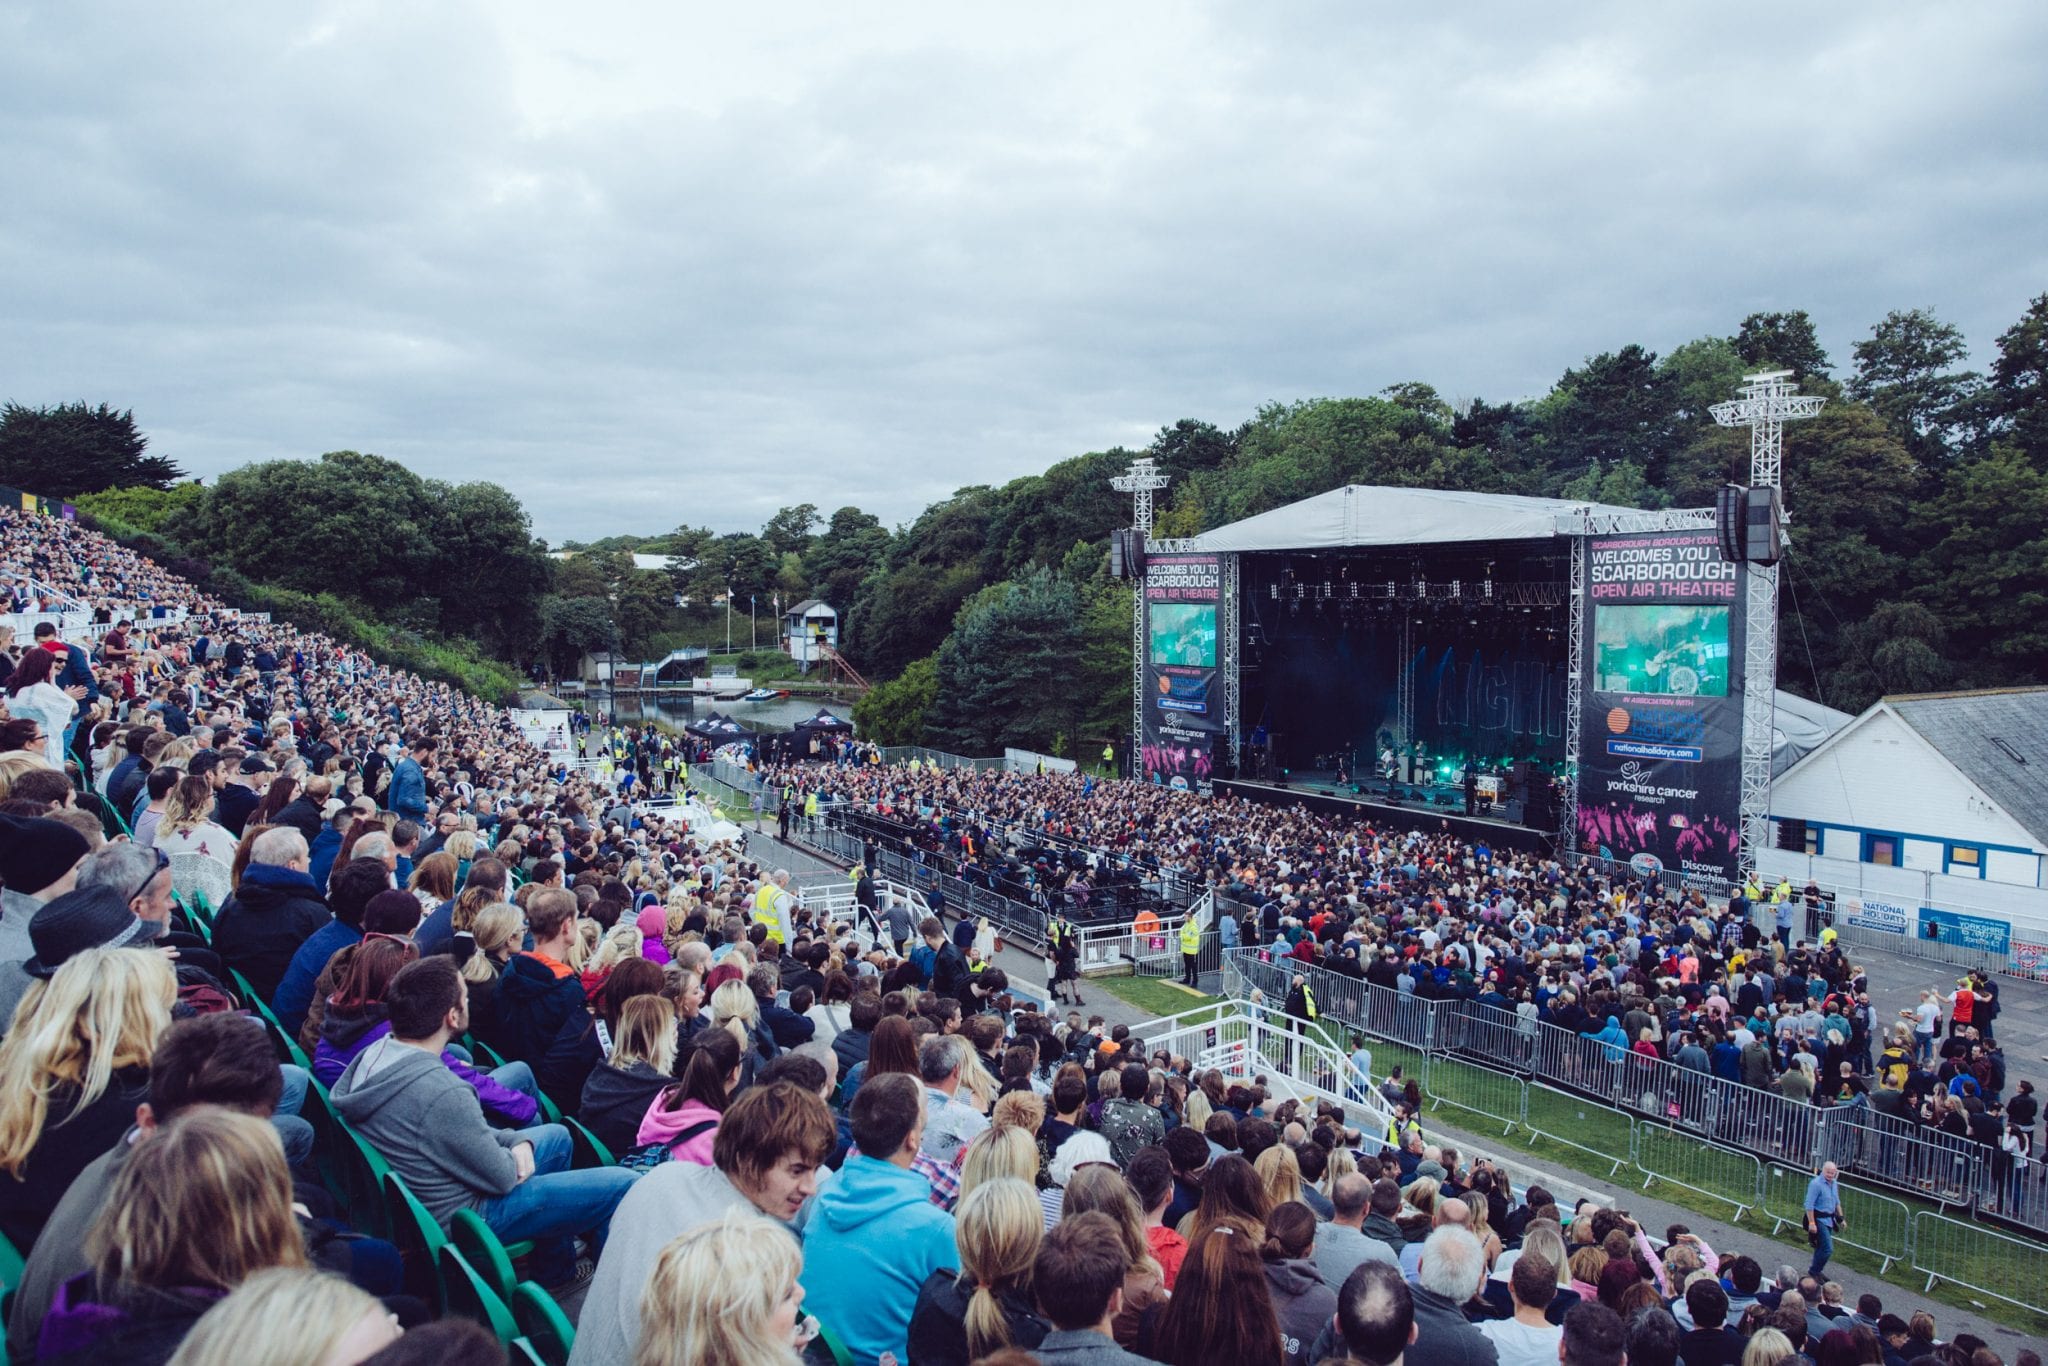 New Plans To Extend Live Music at Scarborough OAT